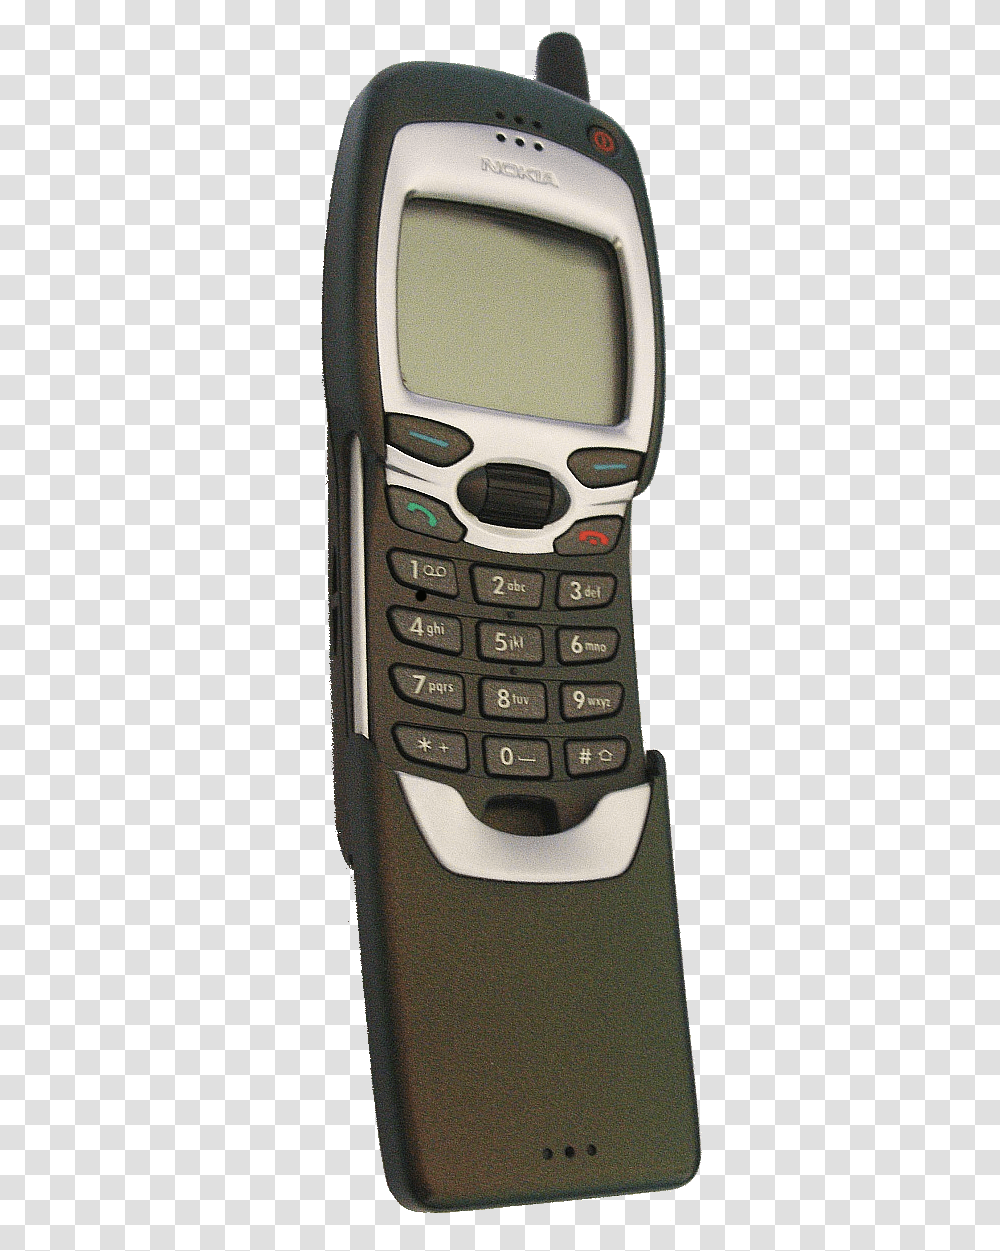 Awesome And Classic Nokia Phones Archive Maemoorg Talk Nokia 1990s Cell Phone, Mobile Phone, Electronics Transparent Png